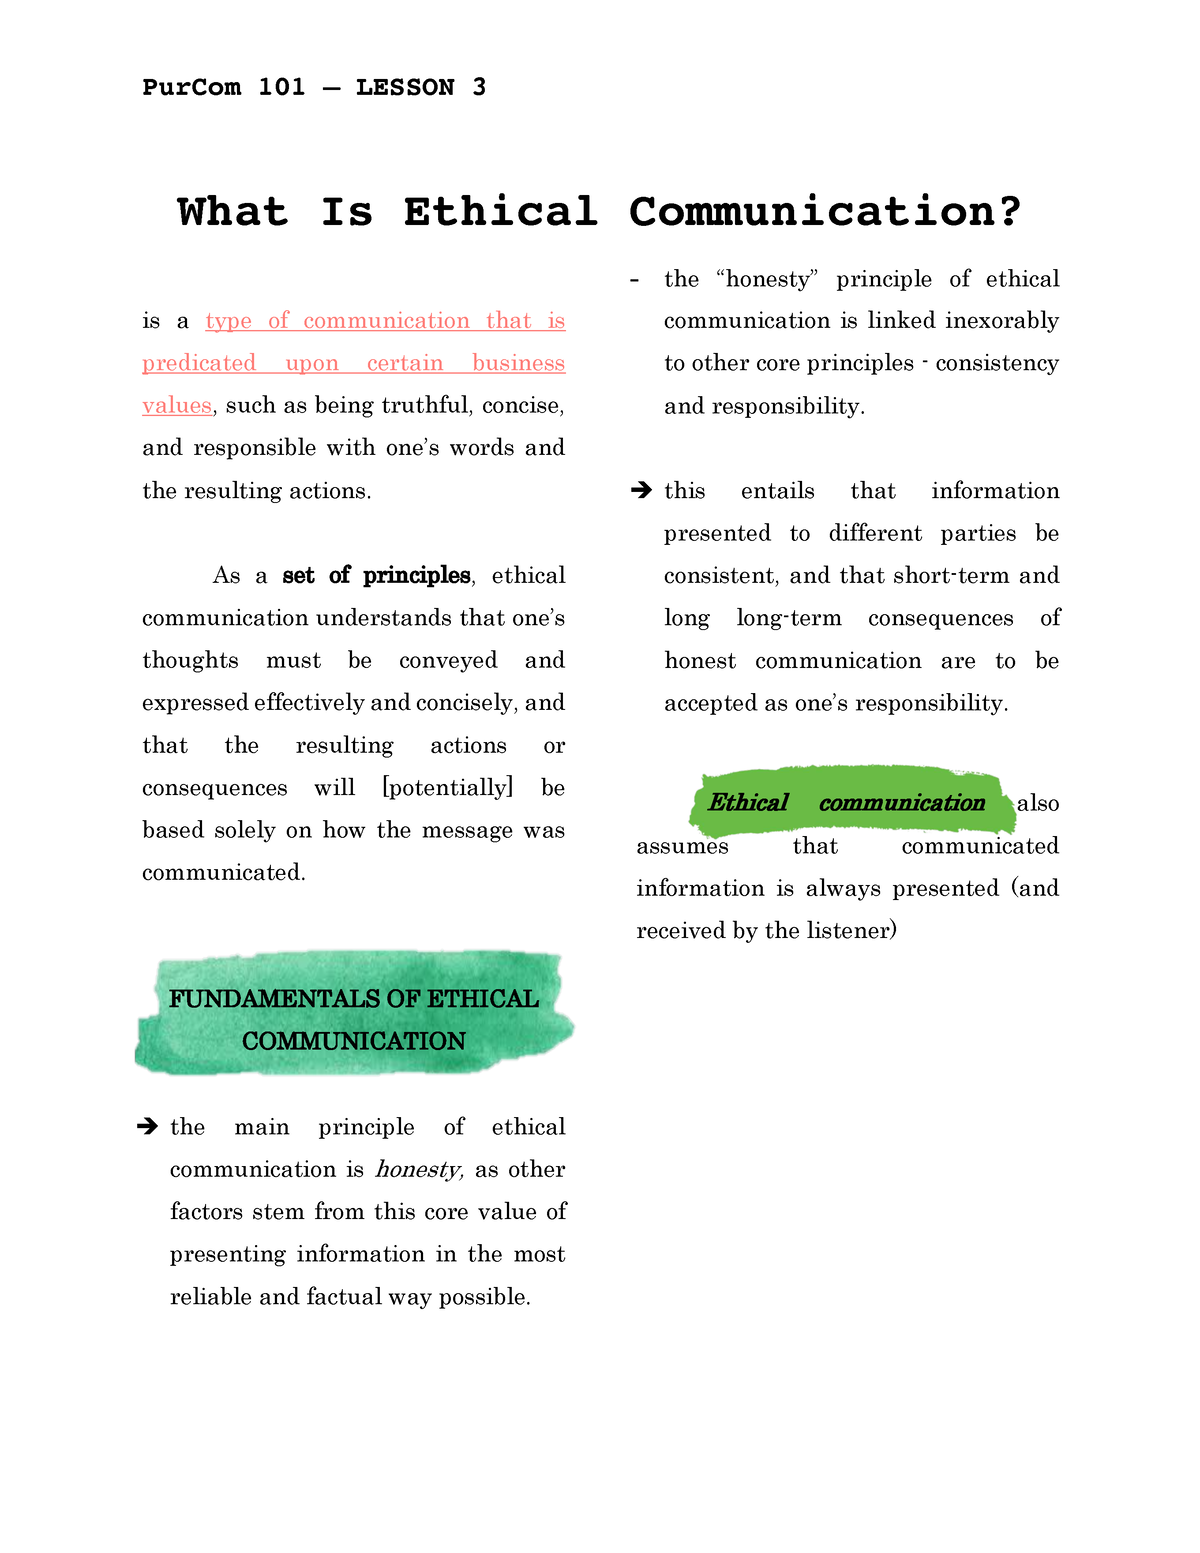 research paper on ethical communication